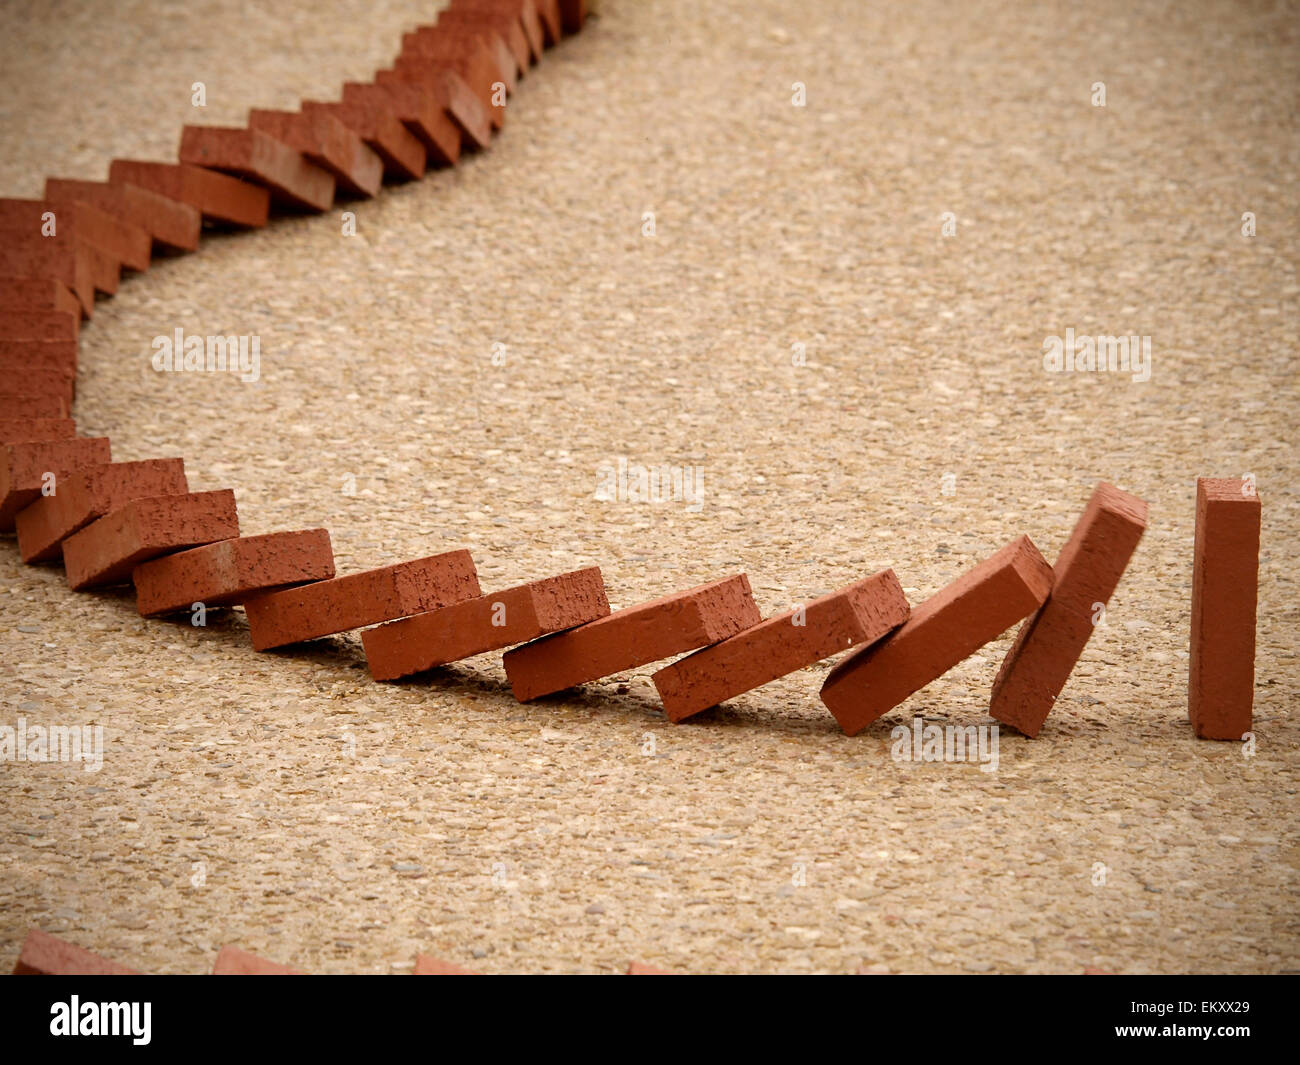 Bricks Tumble And Topple One After The Other The Domino Effect